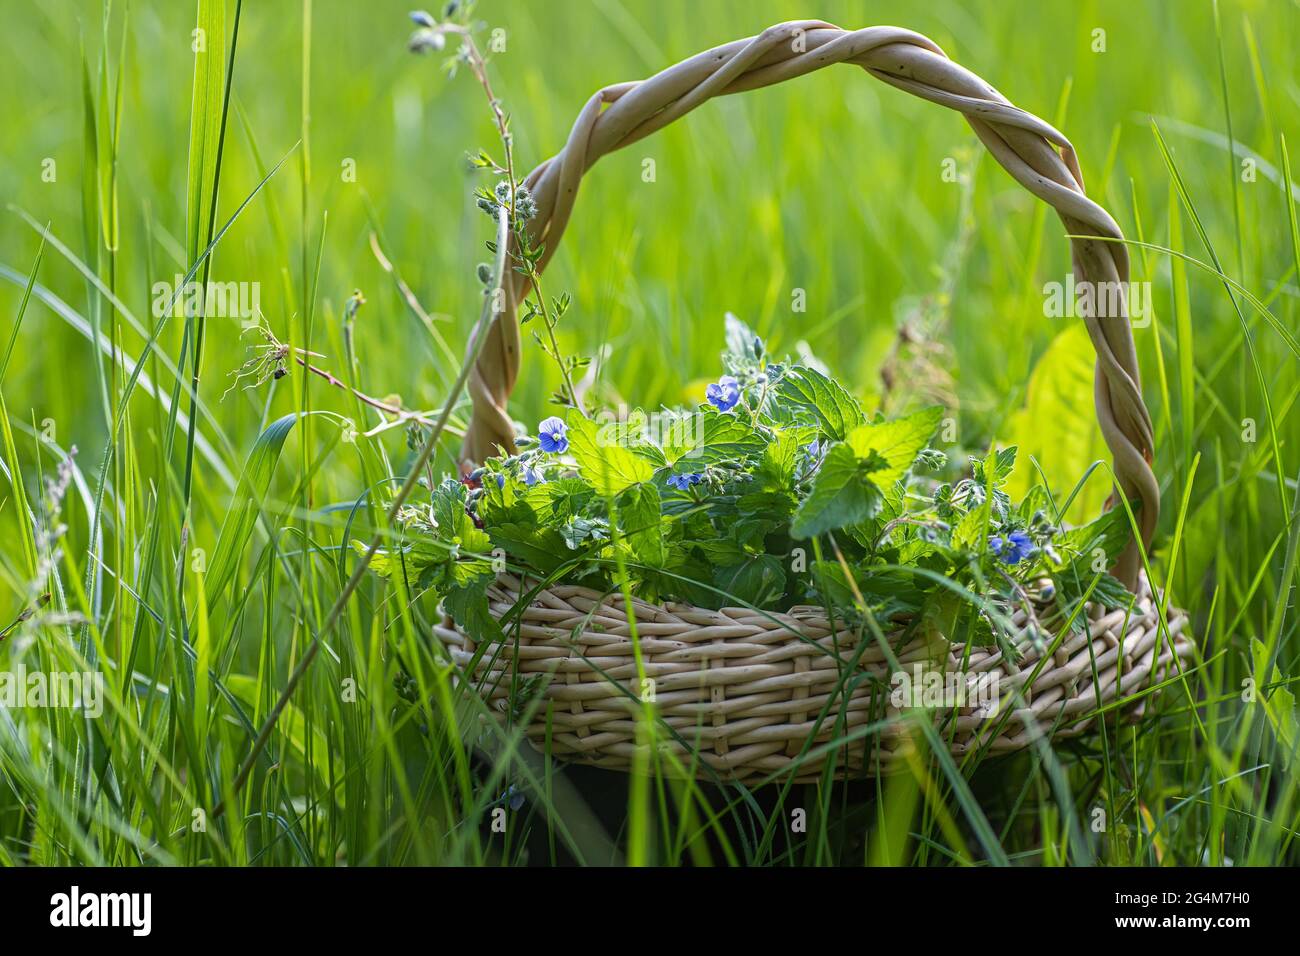 Veronica persica, bird's-eye, or winter speedwell In wicker basket at collection point of medicinal herbs. plant used in medicine and homeopathy Stock Photo